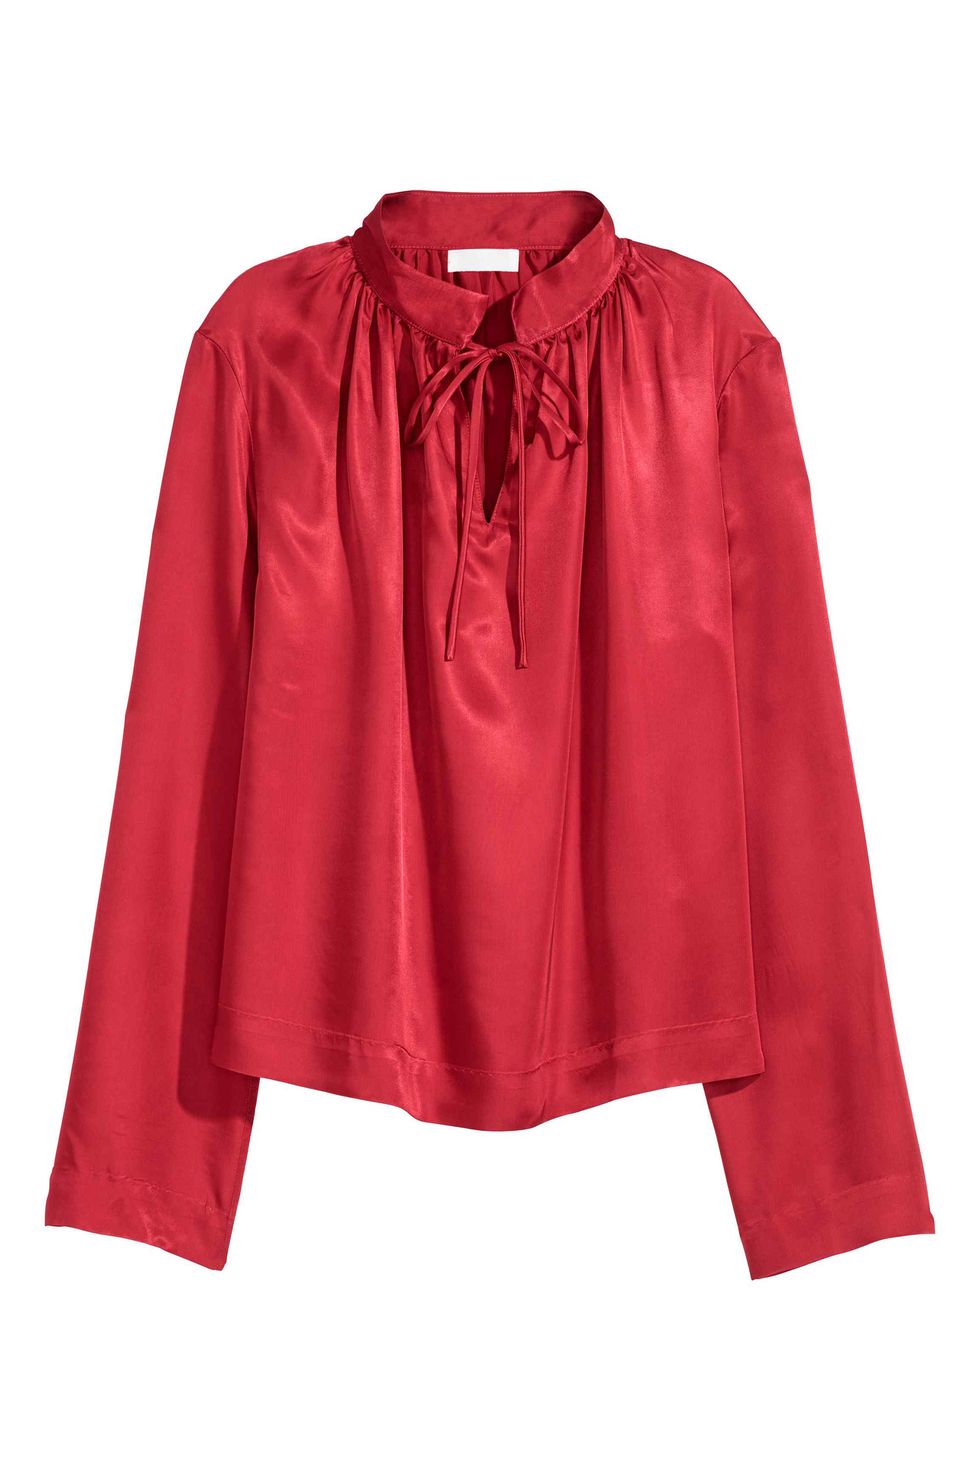 Clothing, Outerwear, Red, Sleeve, Blouse, Collar, Costume, Magenta, Button, 